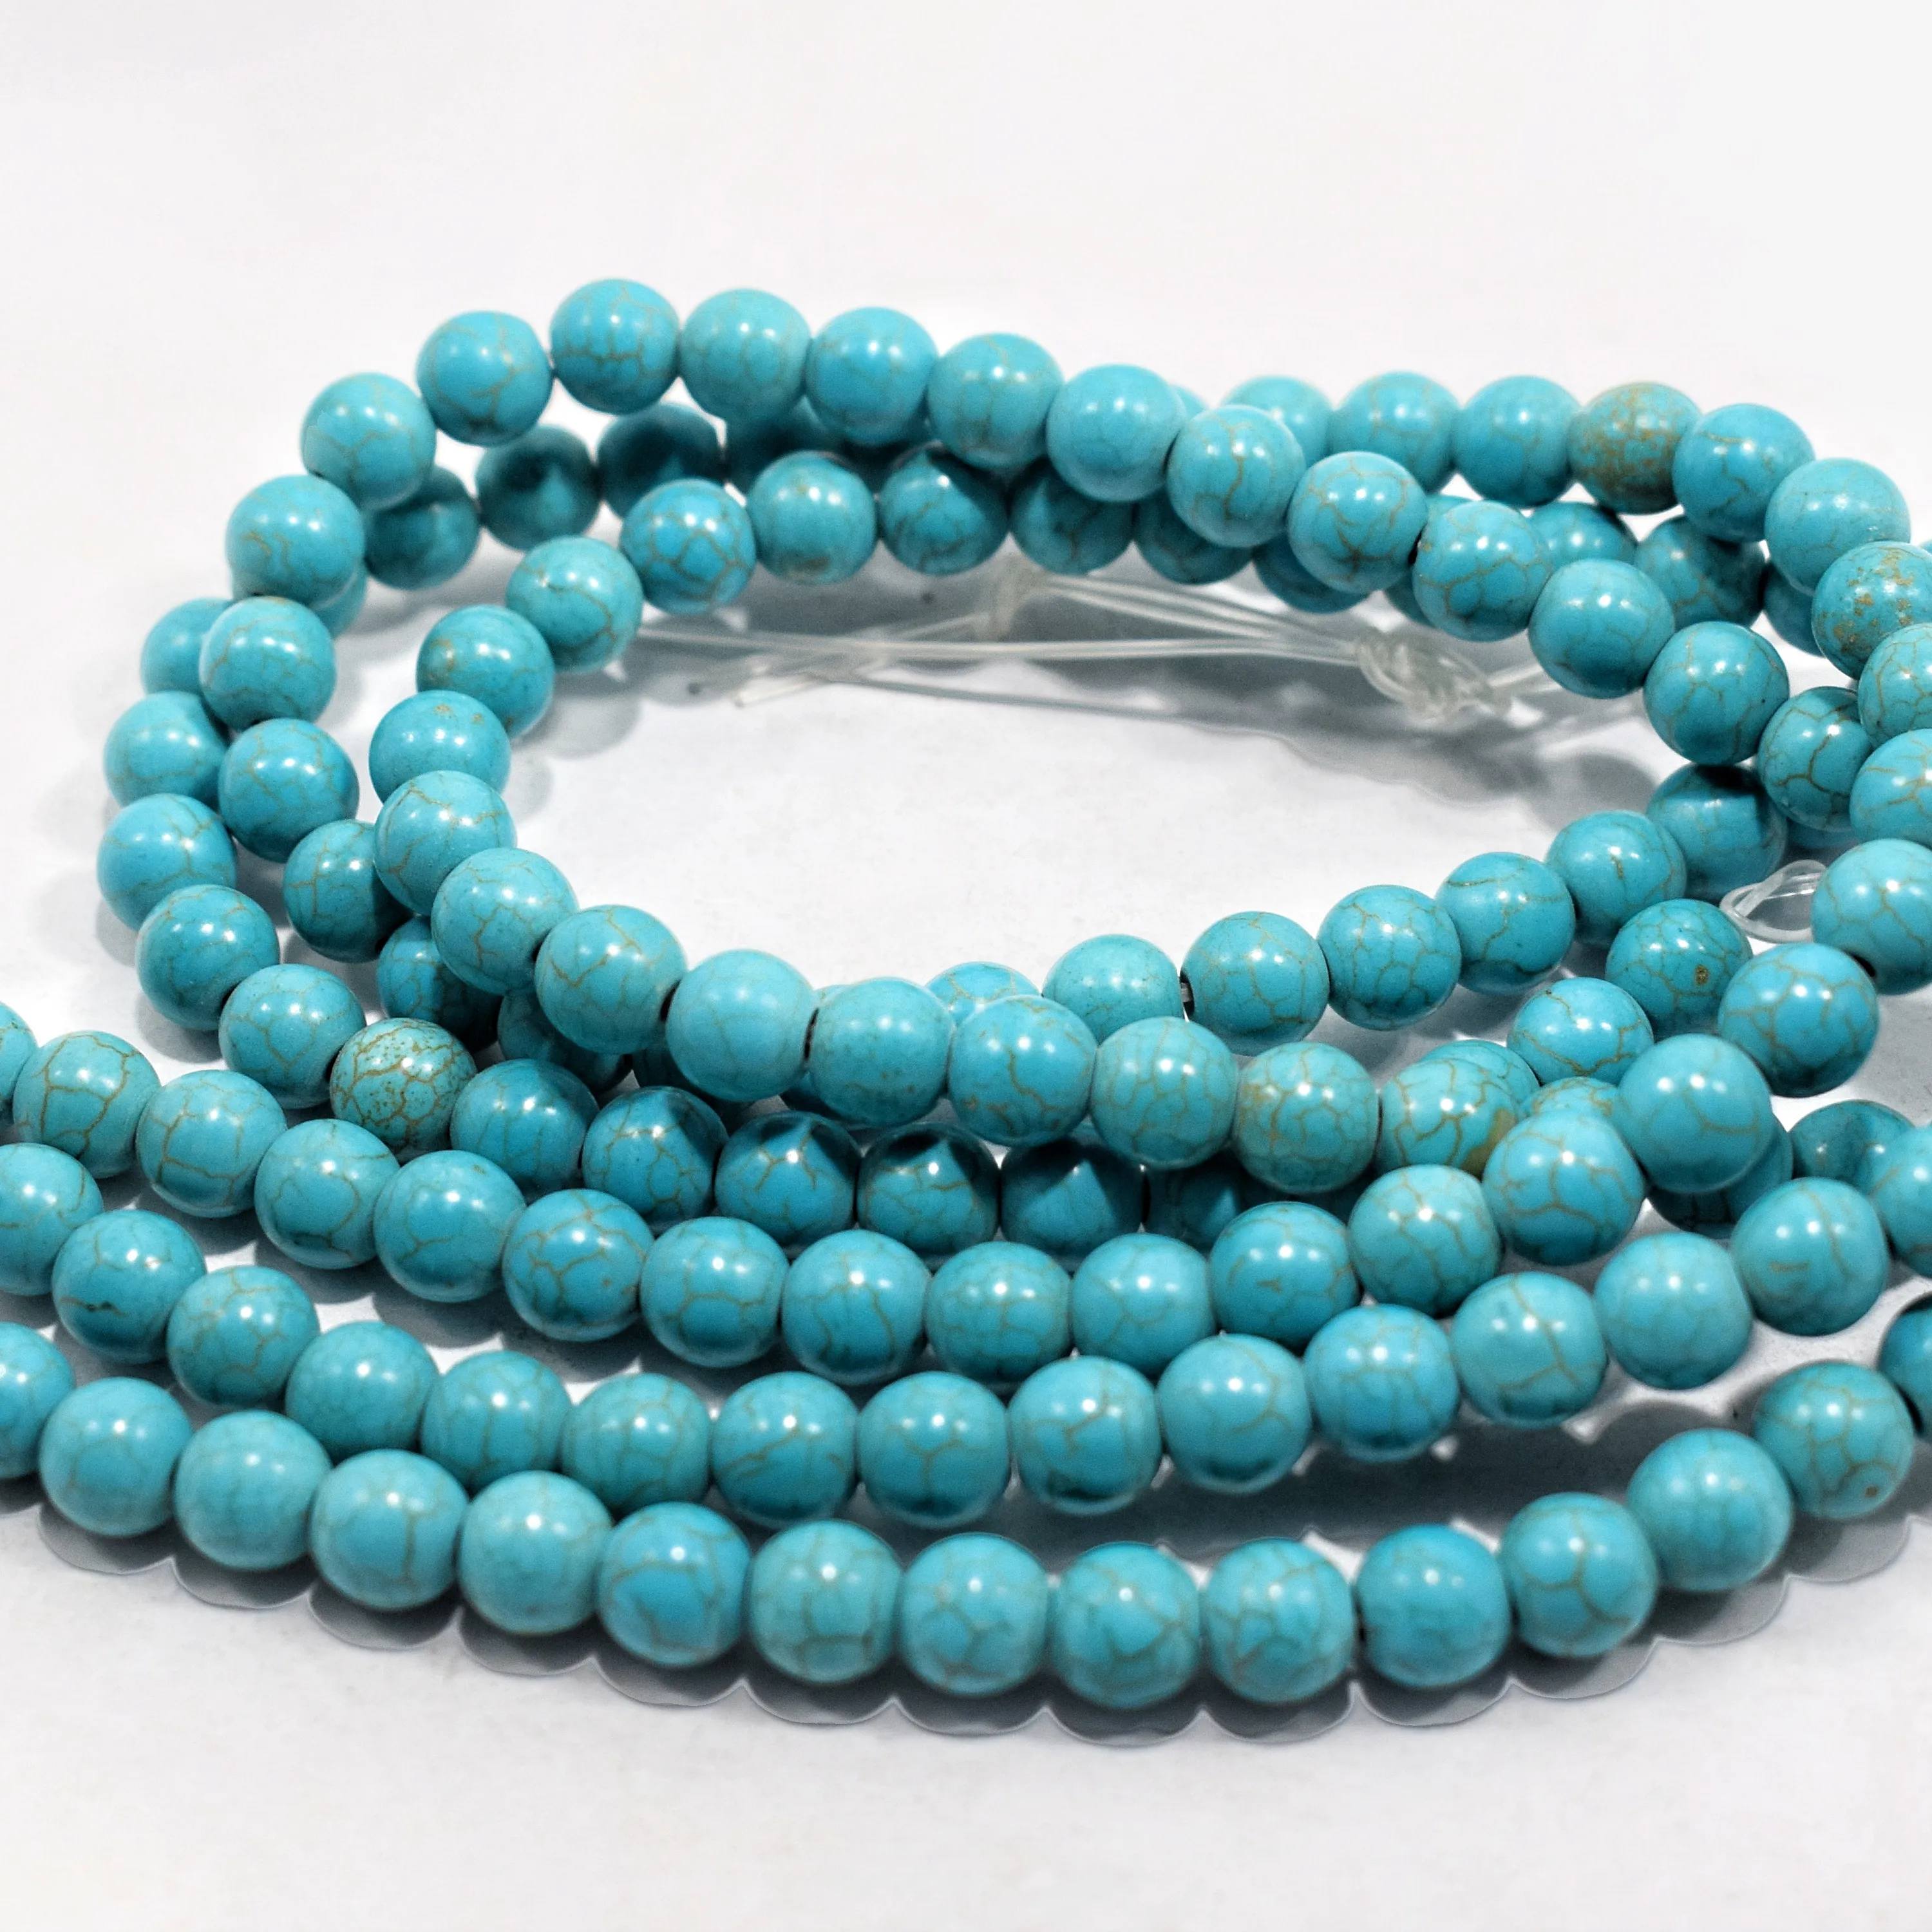 Blue Turquoise Beads | Round Natural Gemstone Loose Beads |